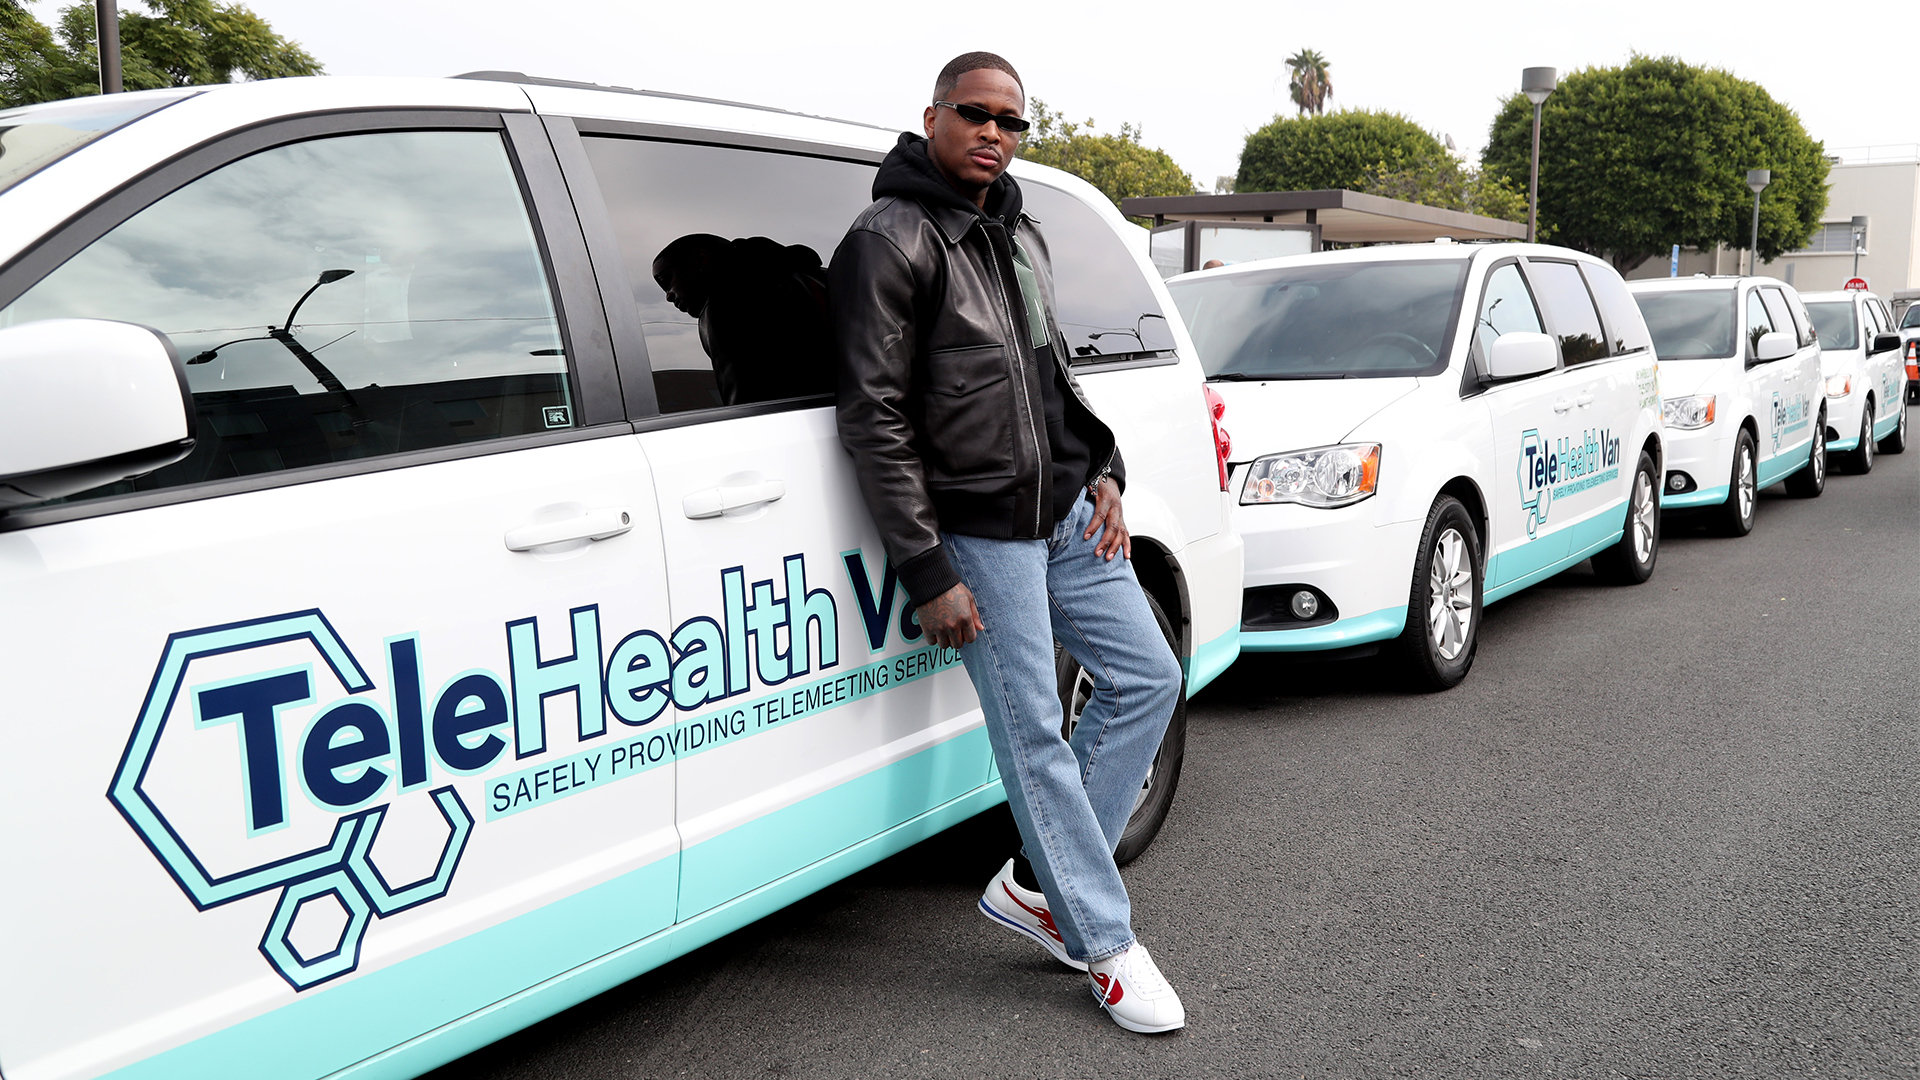 YG Continues To Equip The Underserved With Mental Health Resources Through His TeleHealth Van Program